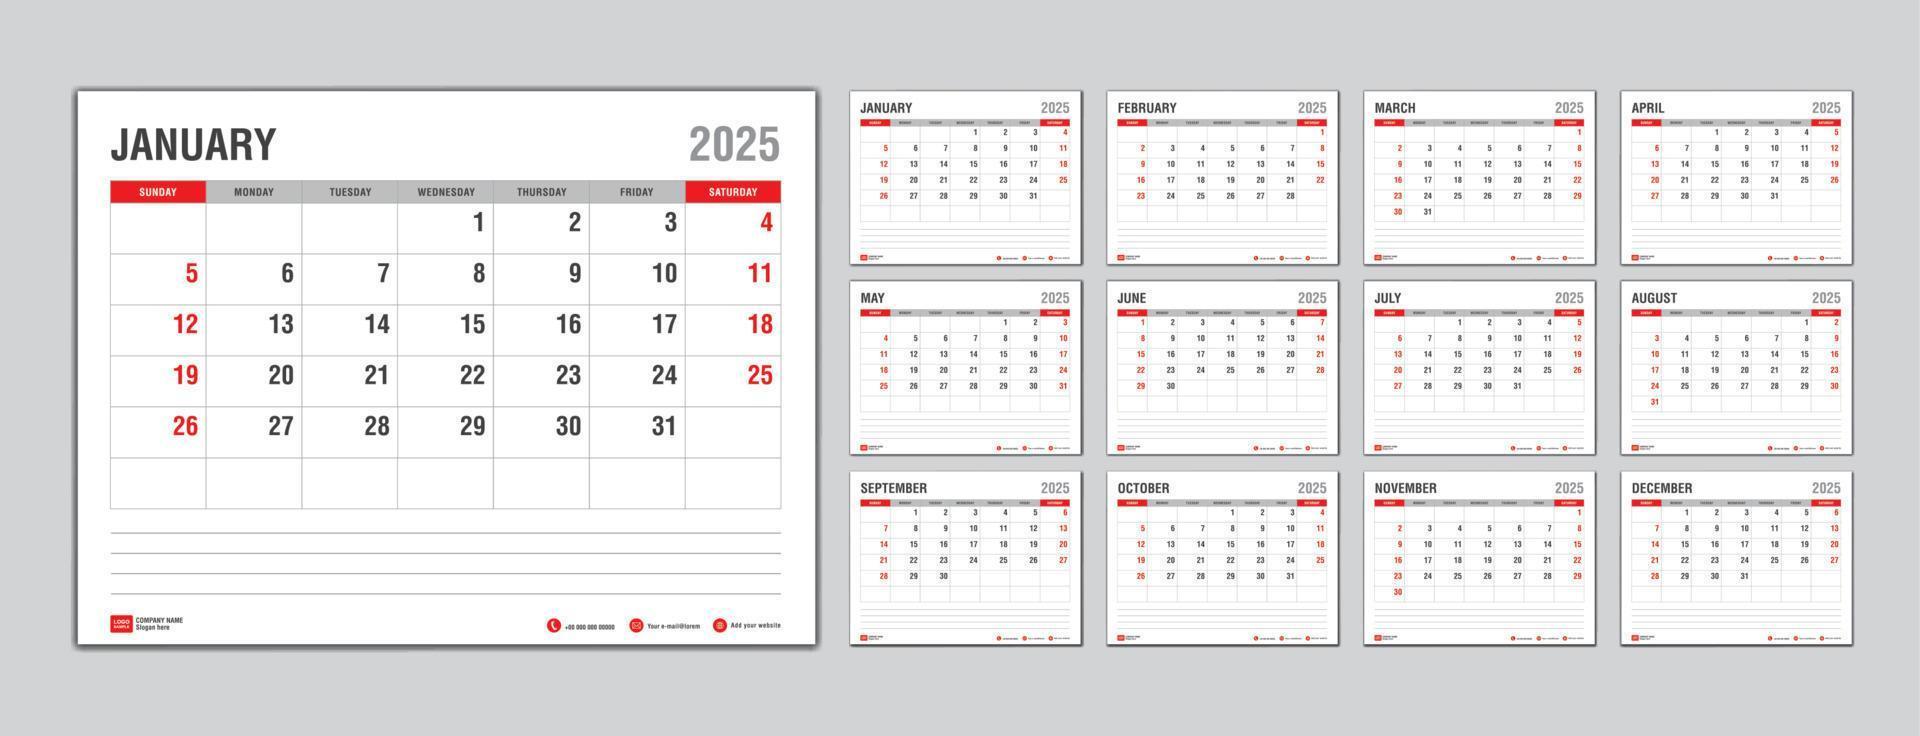 Monthly calendar template for 2025 year, Week Starts on sunday, Planner 2025 year, Wall calendar in a minimalist style, desk calendar 2025 template, New Year Calendar Design, Business template Vector